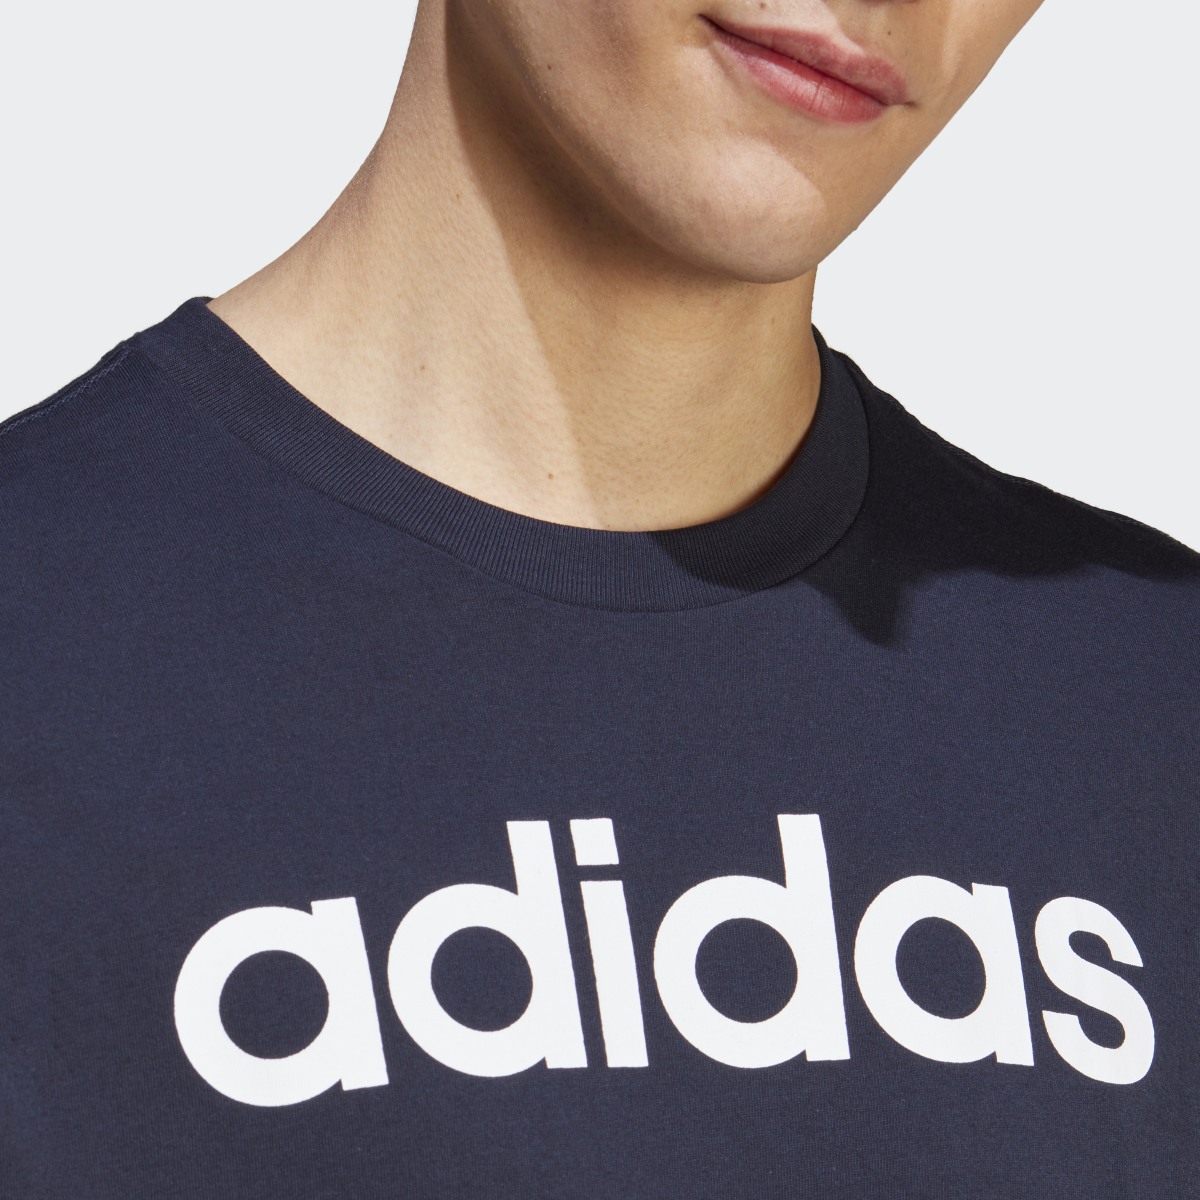 Adidas Essentials Single Jersey Linear Embroidered Logo Tee. 6